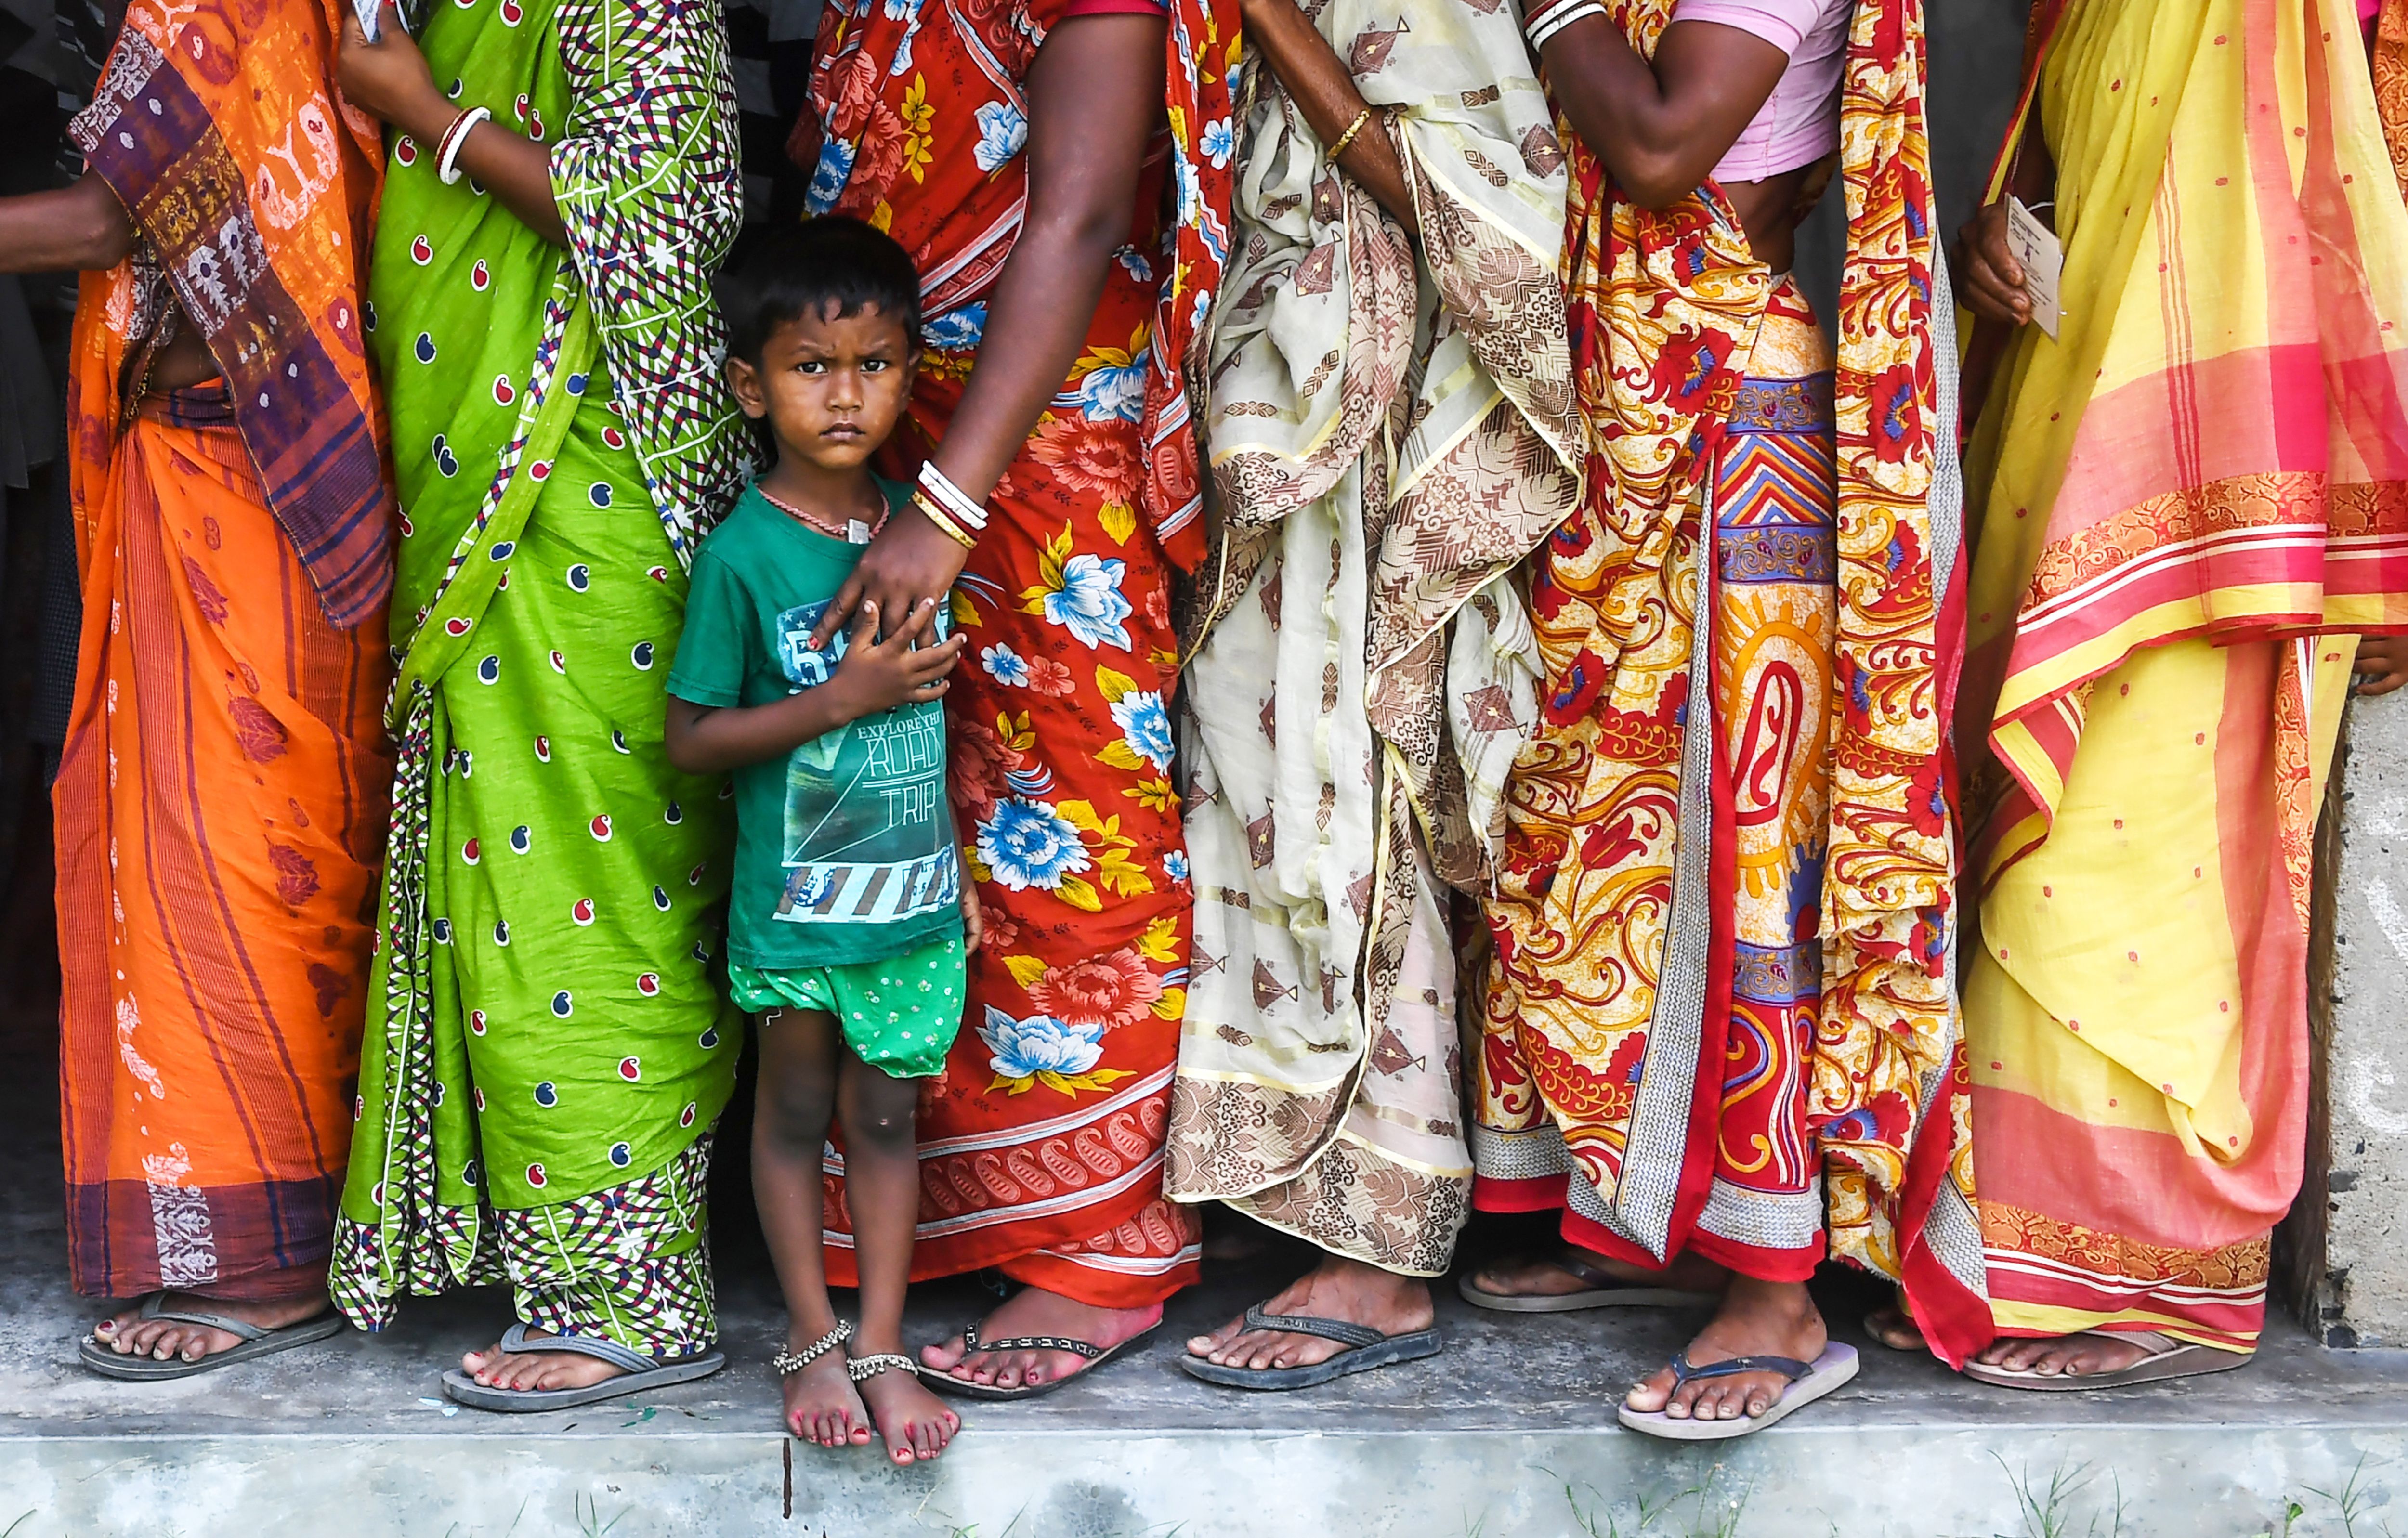 Indian voters queue to cast their votes in the Ghoramara island around 110 km south of Kolkata on May 19, 2019.